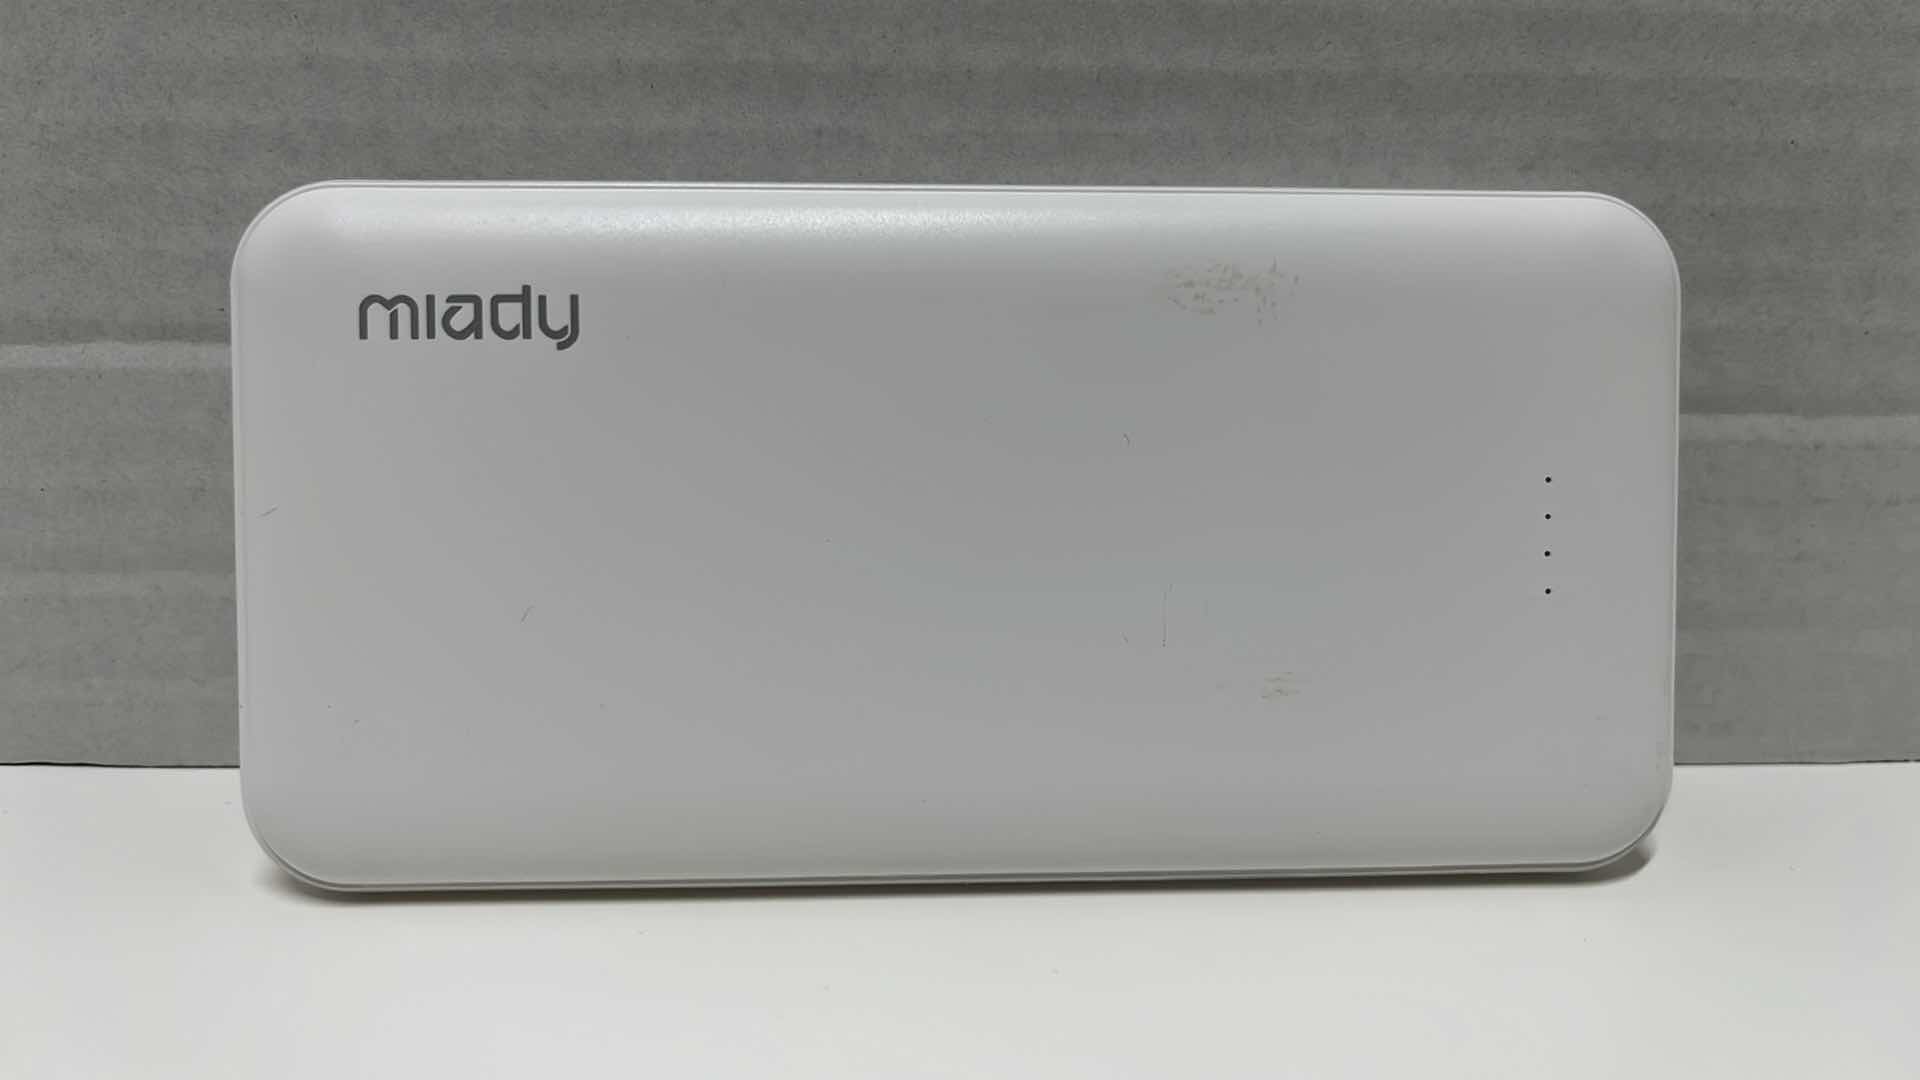 Photo 4 of MIADY 10000mAh DUAL USB PORTABLE CHARGER FAST CHARGING POWER BANK W USB TYPE C CORD, MODEL AS-TPB21